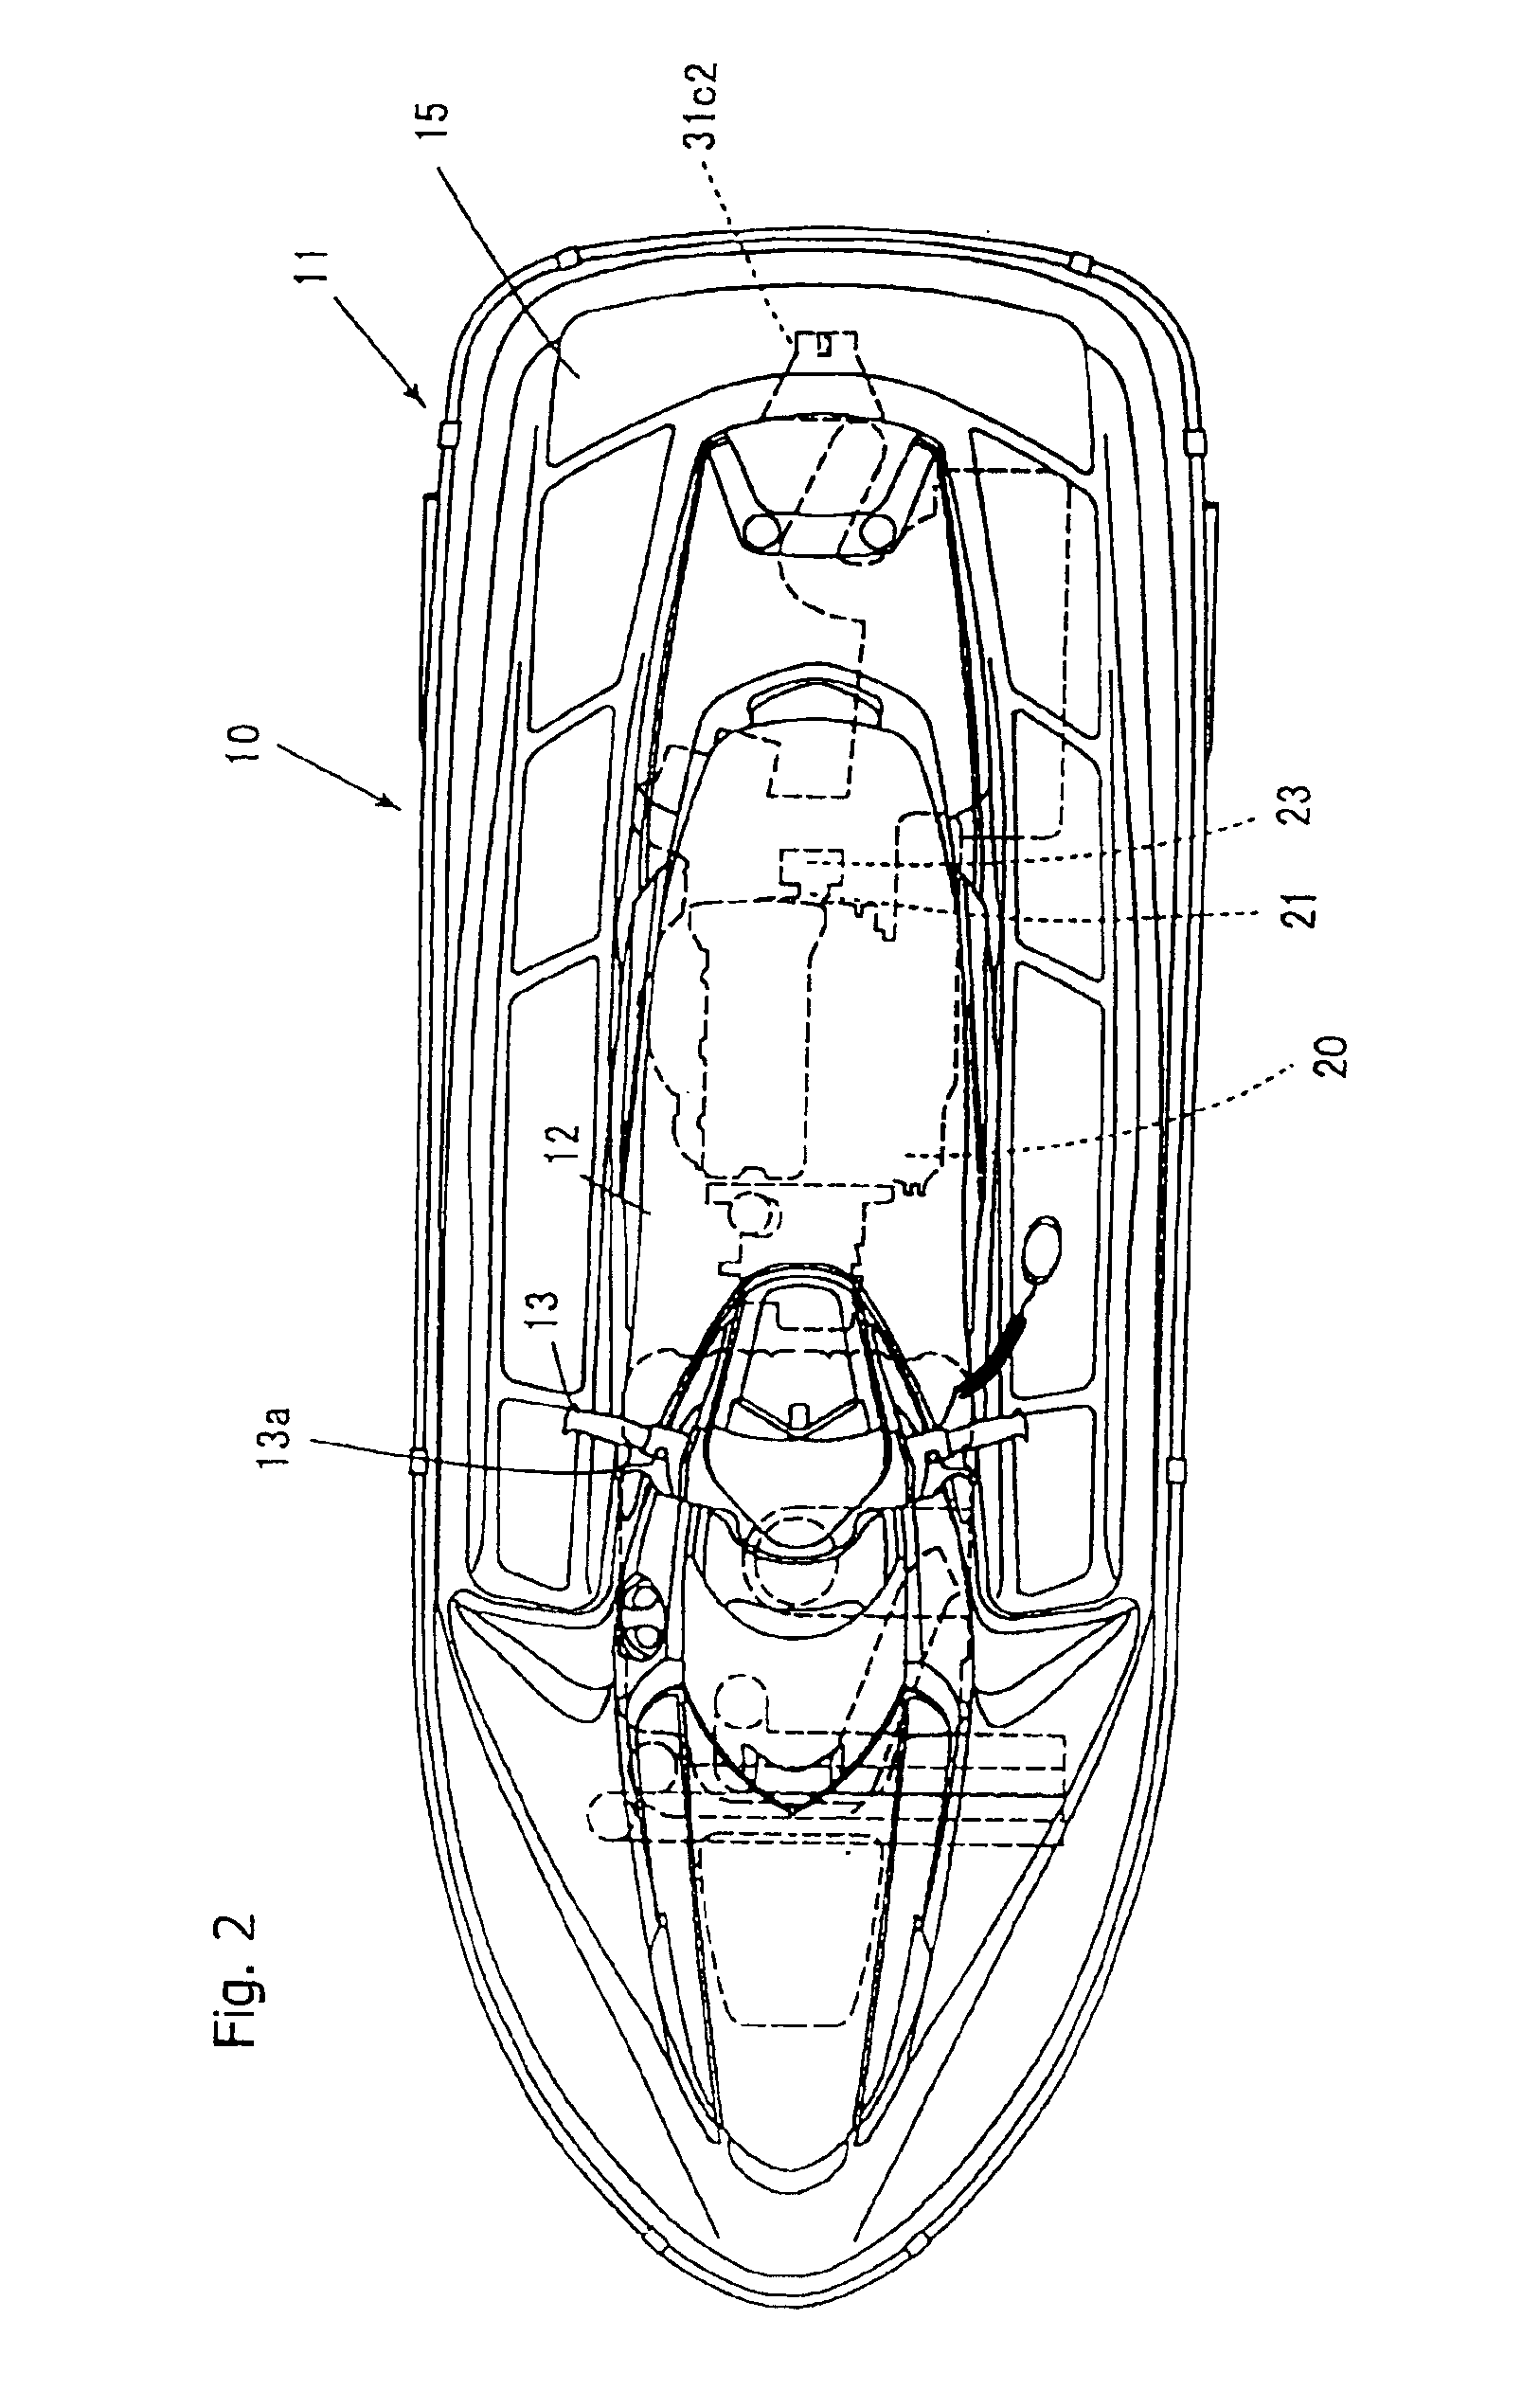 Water jet propeller apparatus for a personal watercraft